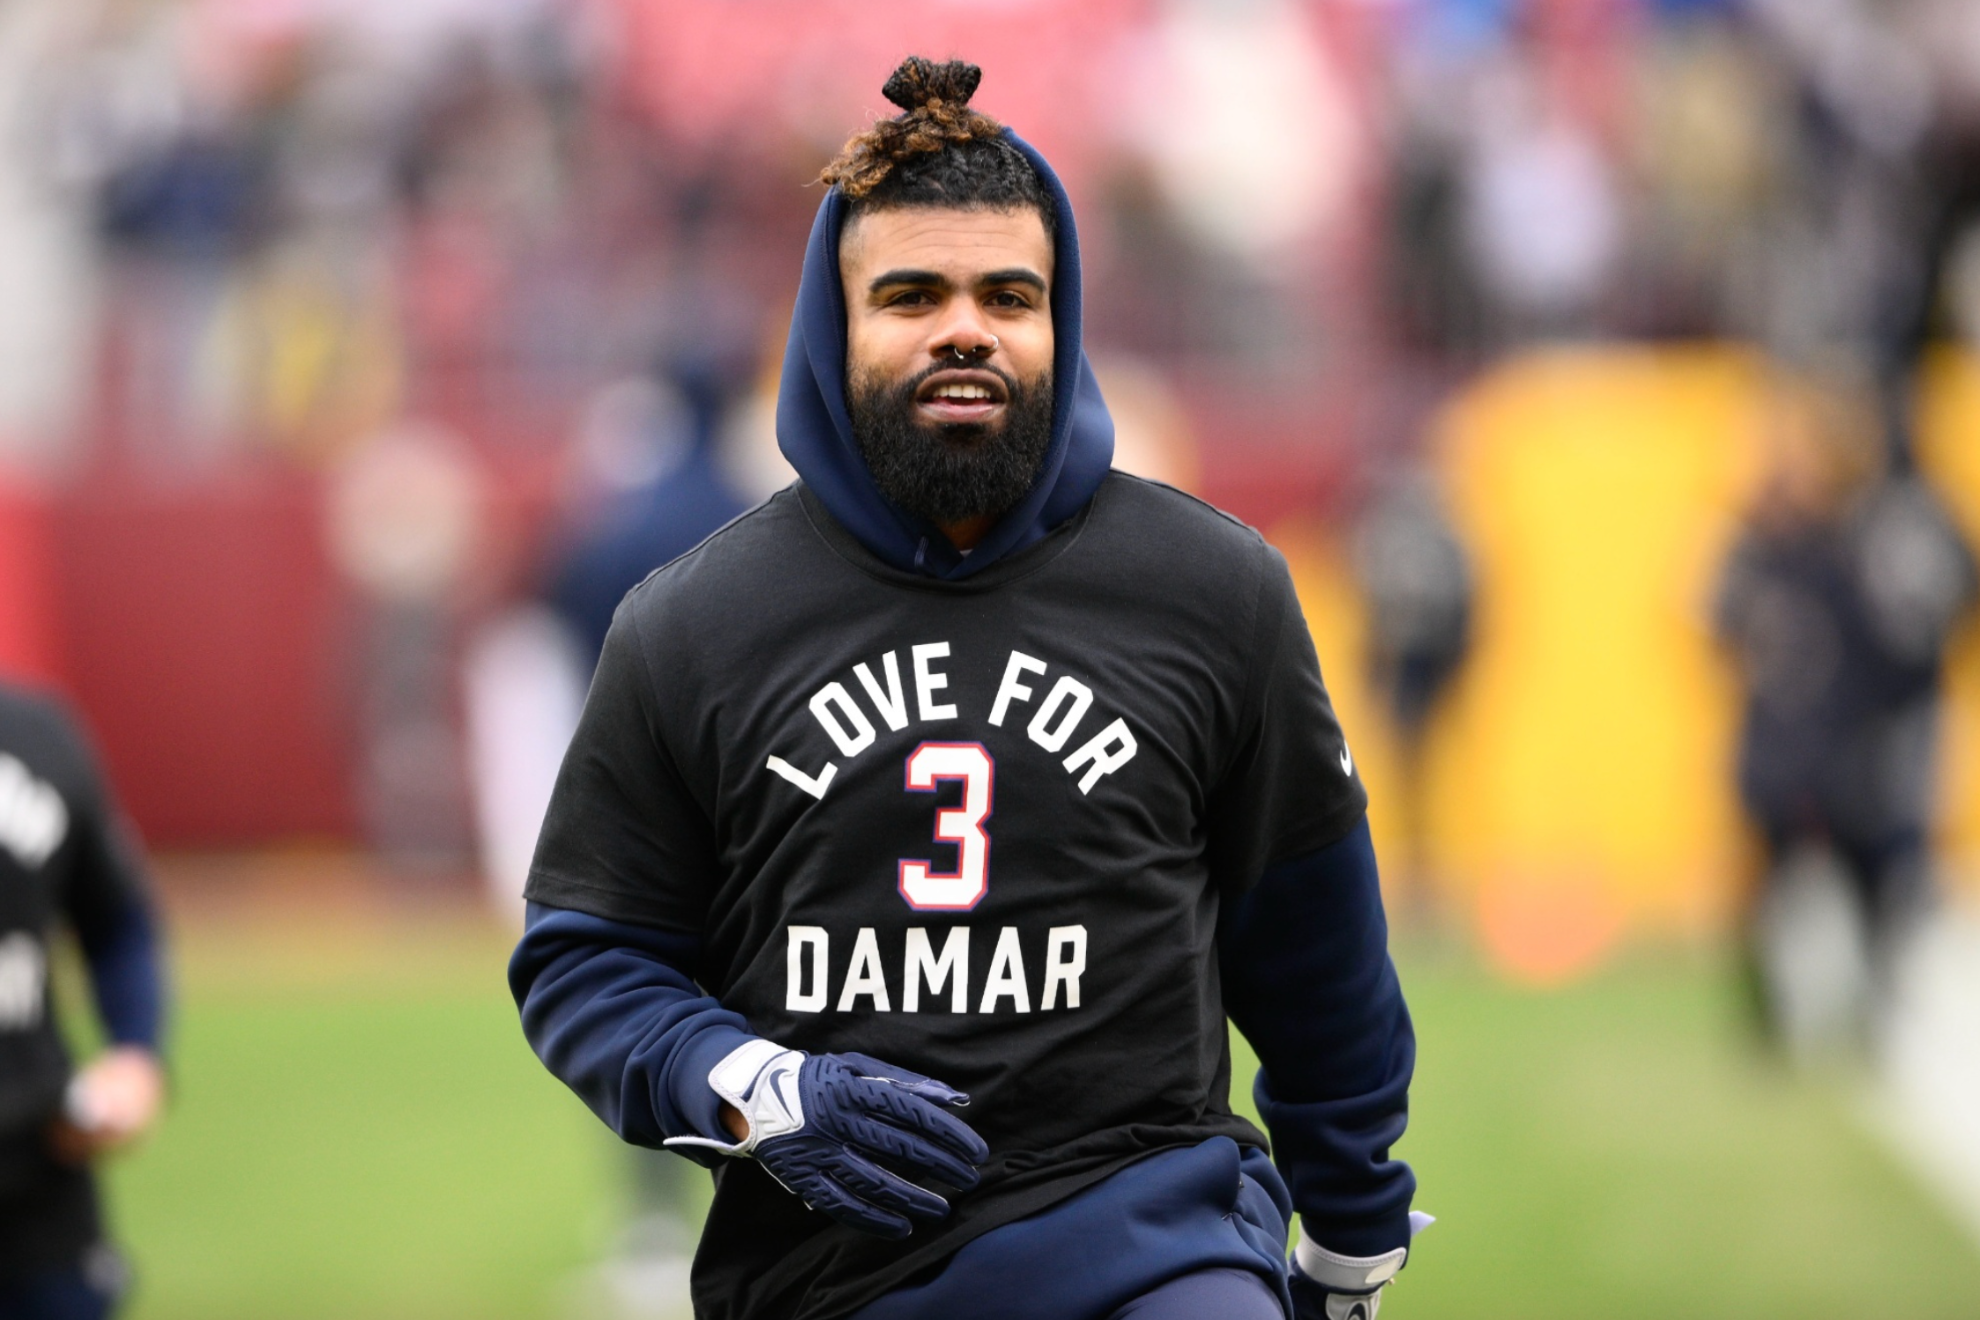 Ezekiel Elliotts tough competition to fulfill his dream of returning to the Cowboys